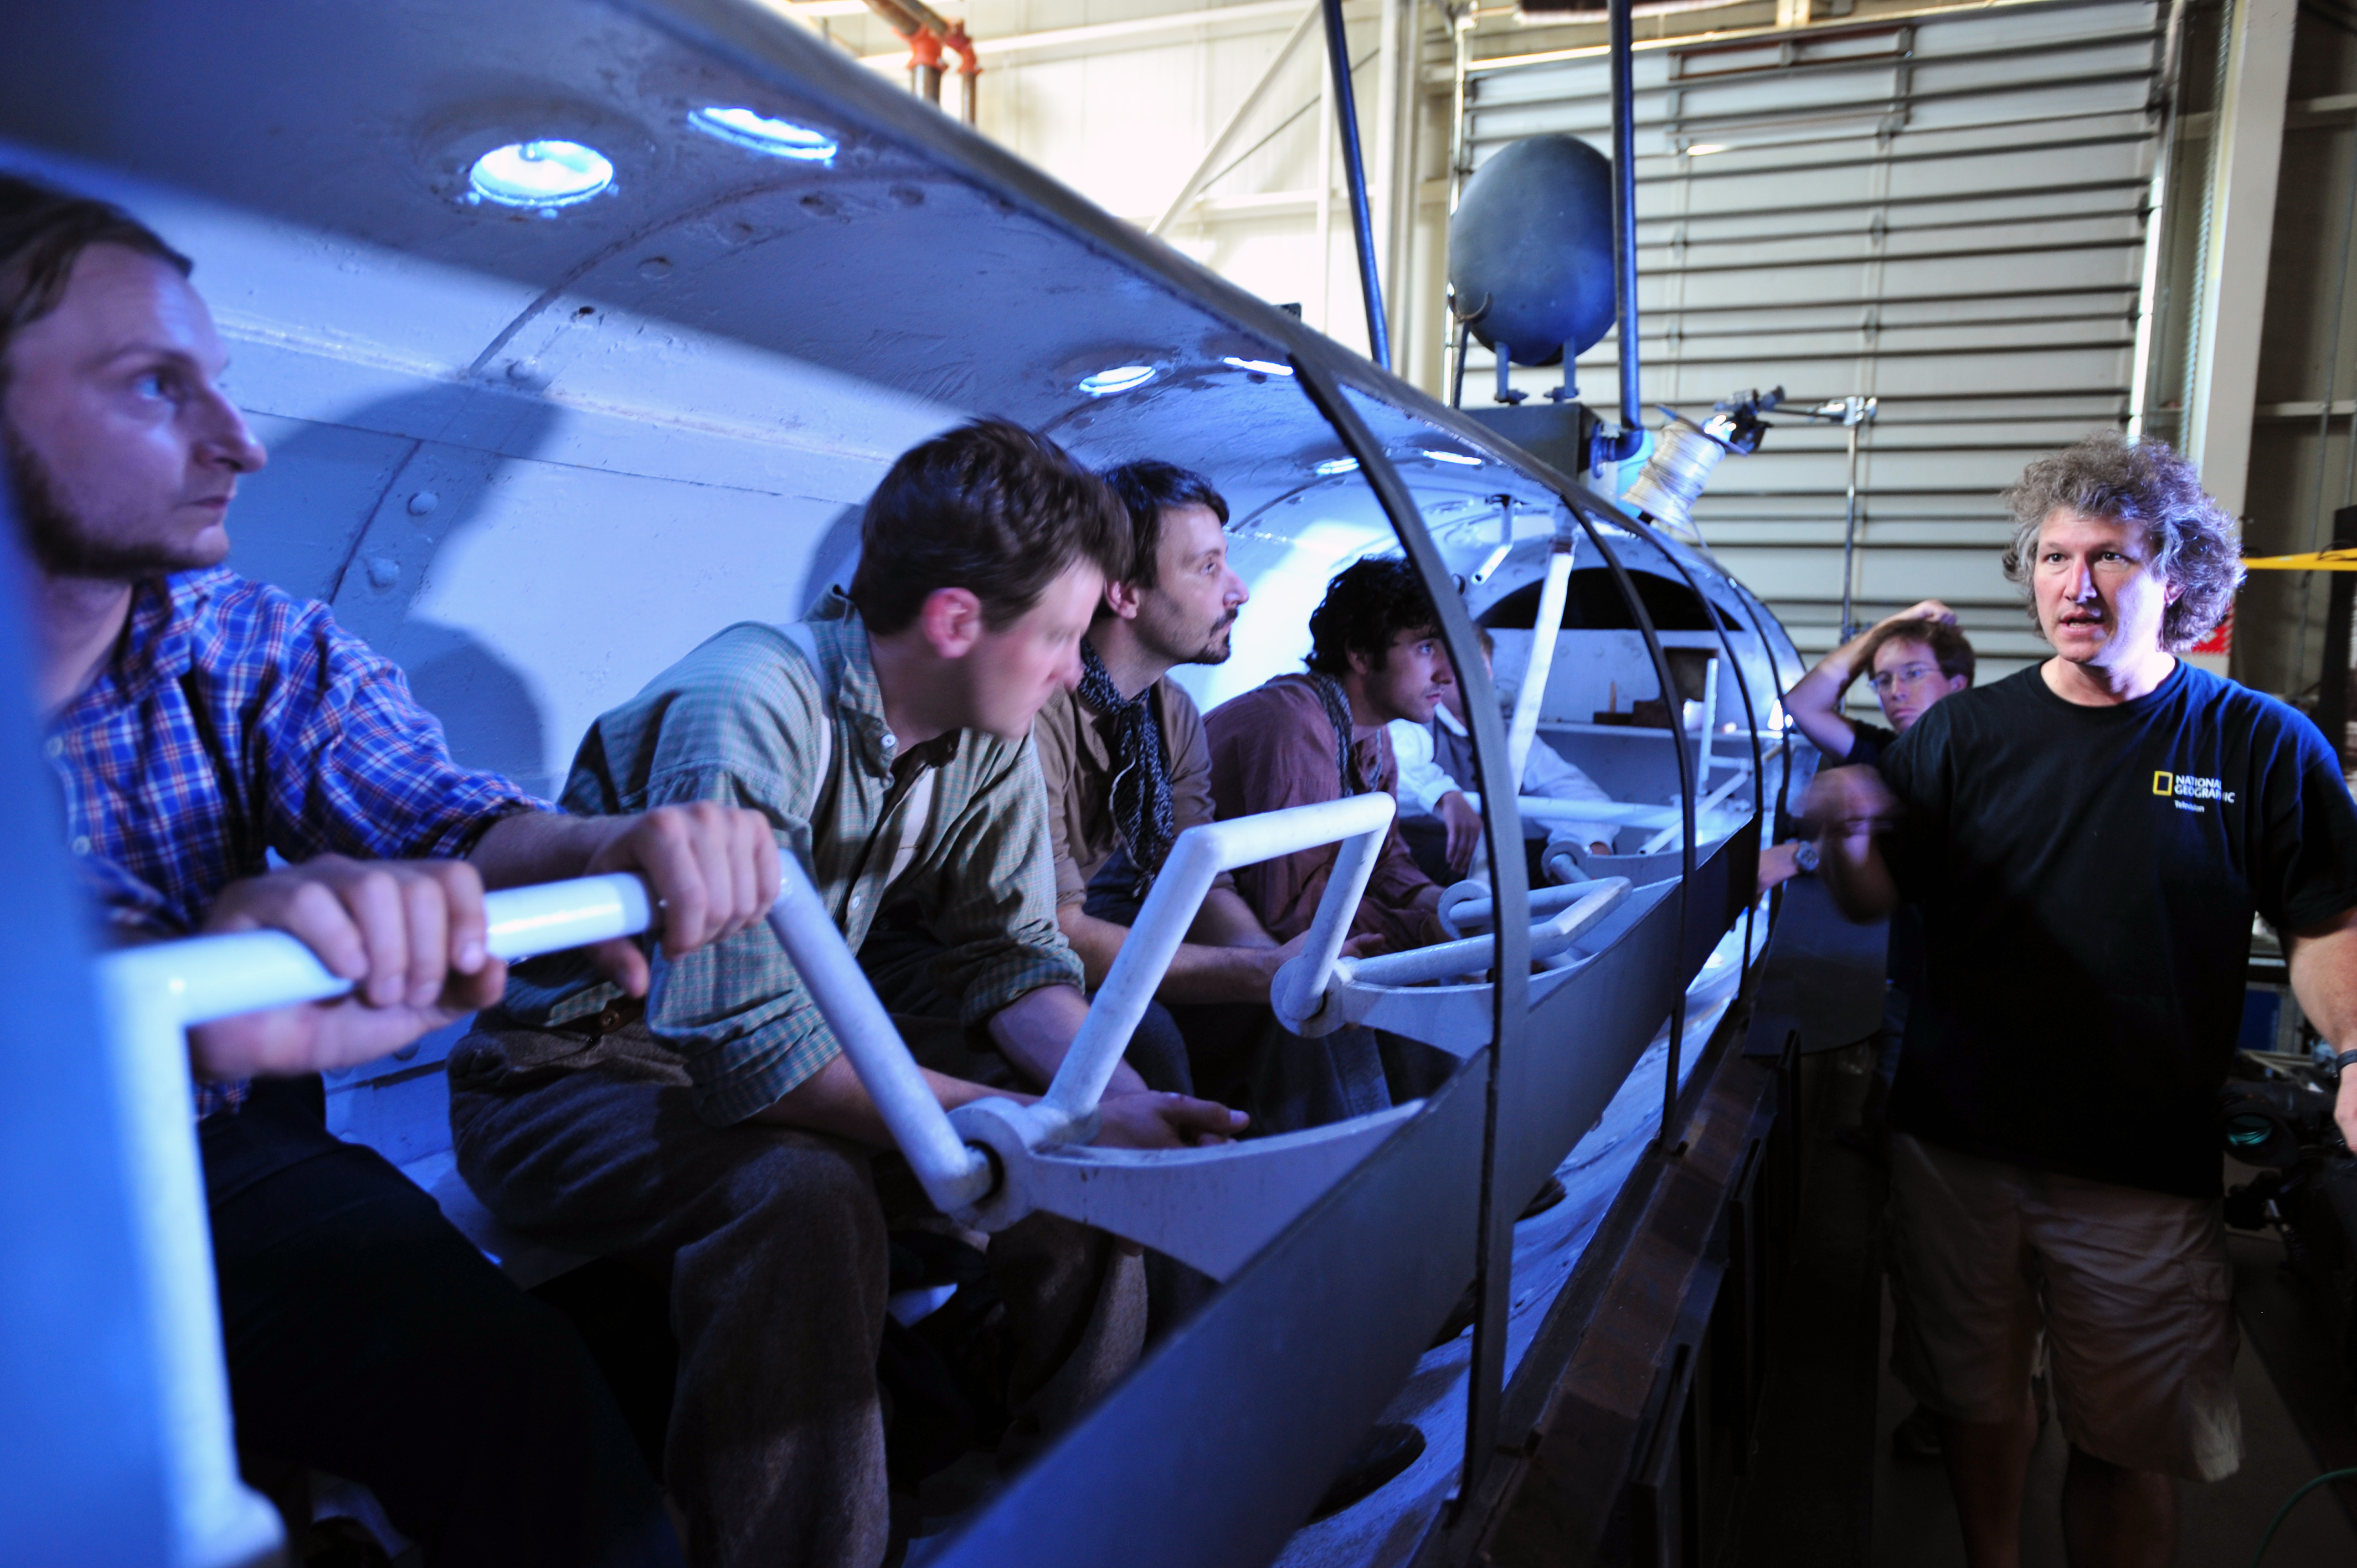 RC working with actors to recreate scenes inside a mock-up of the C.S.S. Hunley - the first submarine to engage and sink an enemy warship. The footage was part of the National Geographic TV Special, 'Secret Weapon of the Confederacy.